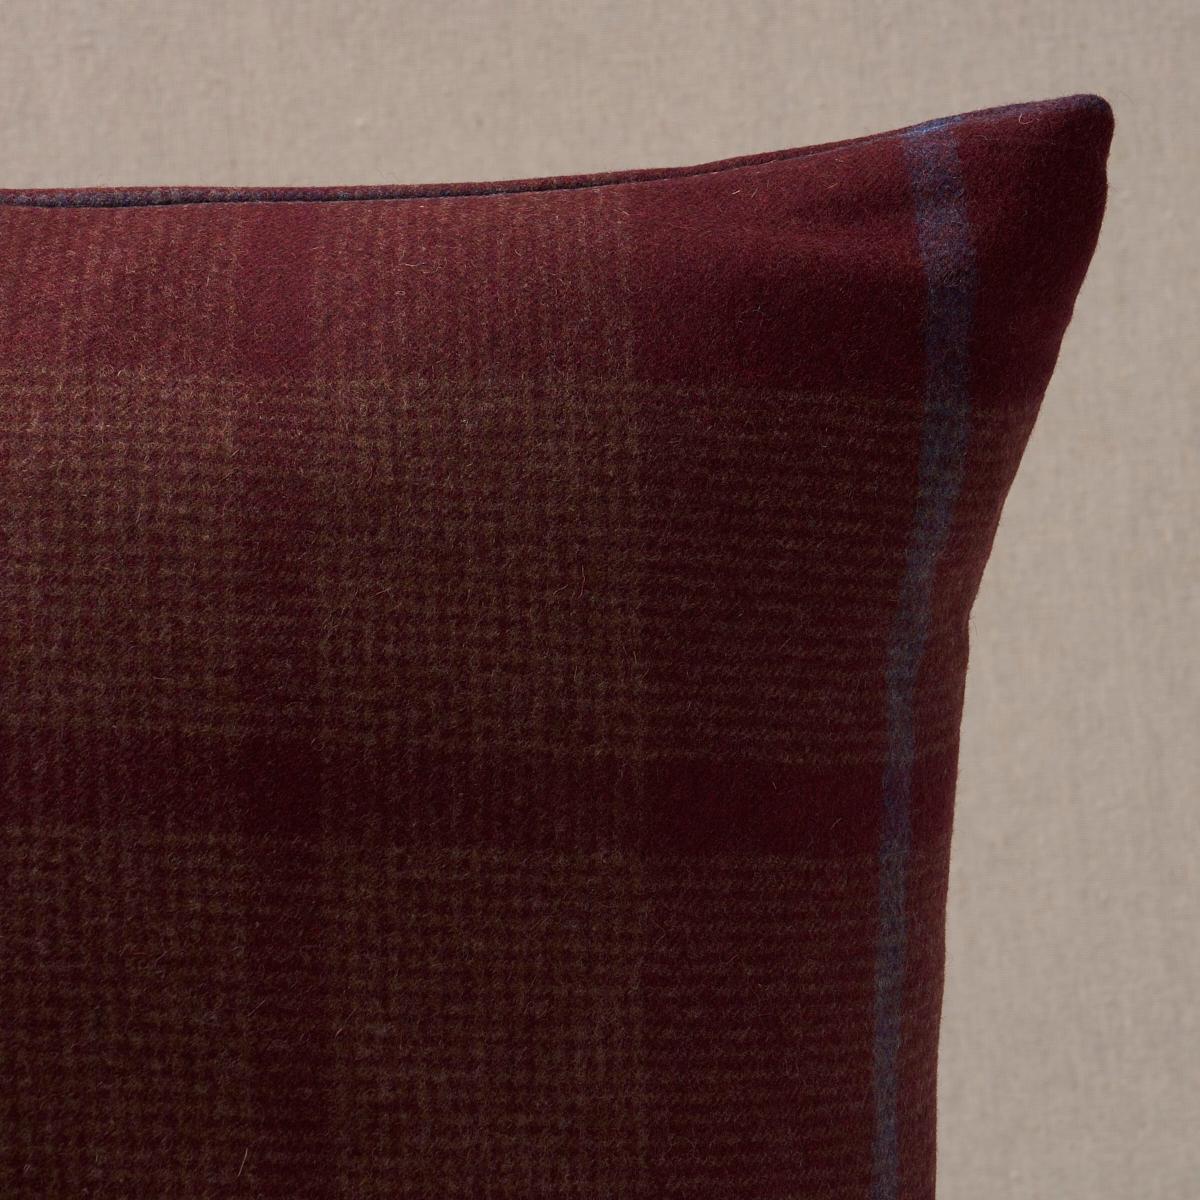 This pillow features Montana Wool Plaid with a knife edge finish. Montana Wool Plaid in burgundy is a fine, tightly woven houndstooth check with an overstripe that adds lovely depth and a touch of contrast. Pillow includes a feather/down fill insert